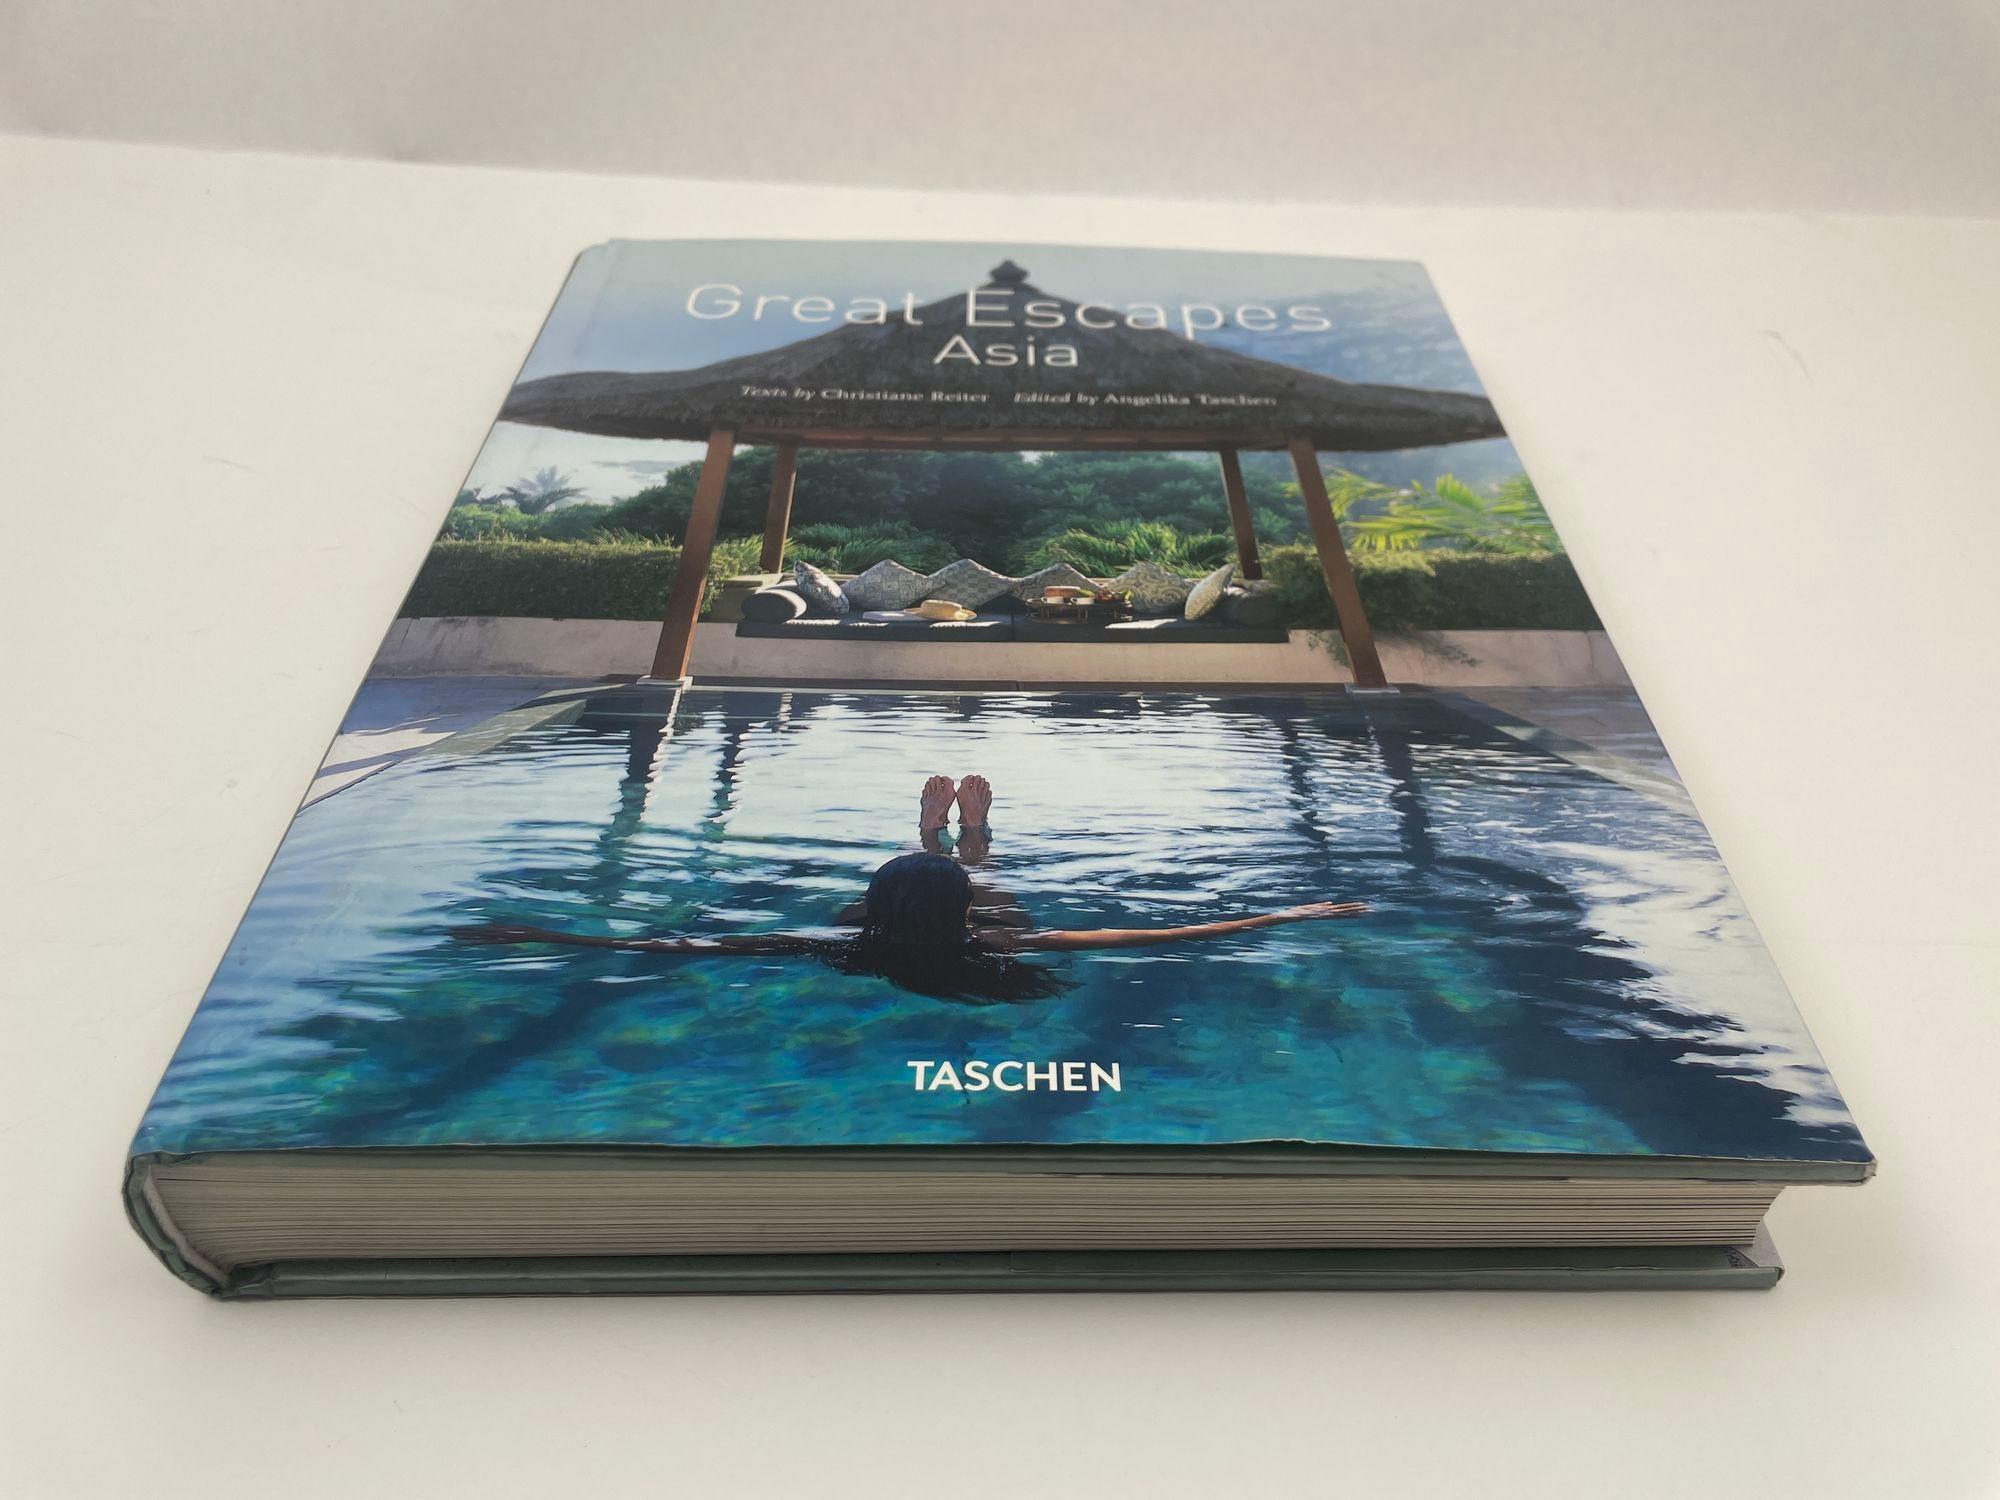 Great Escapes Asia Hardcover Table Book by Taschen Publishing.
Asia promises multisensory marvels. Whether it’s a scorching hot curry, the vivid sounds of a local market, or an expert massage in a haven of feng-shui calm, the world’s largest